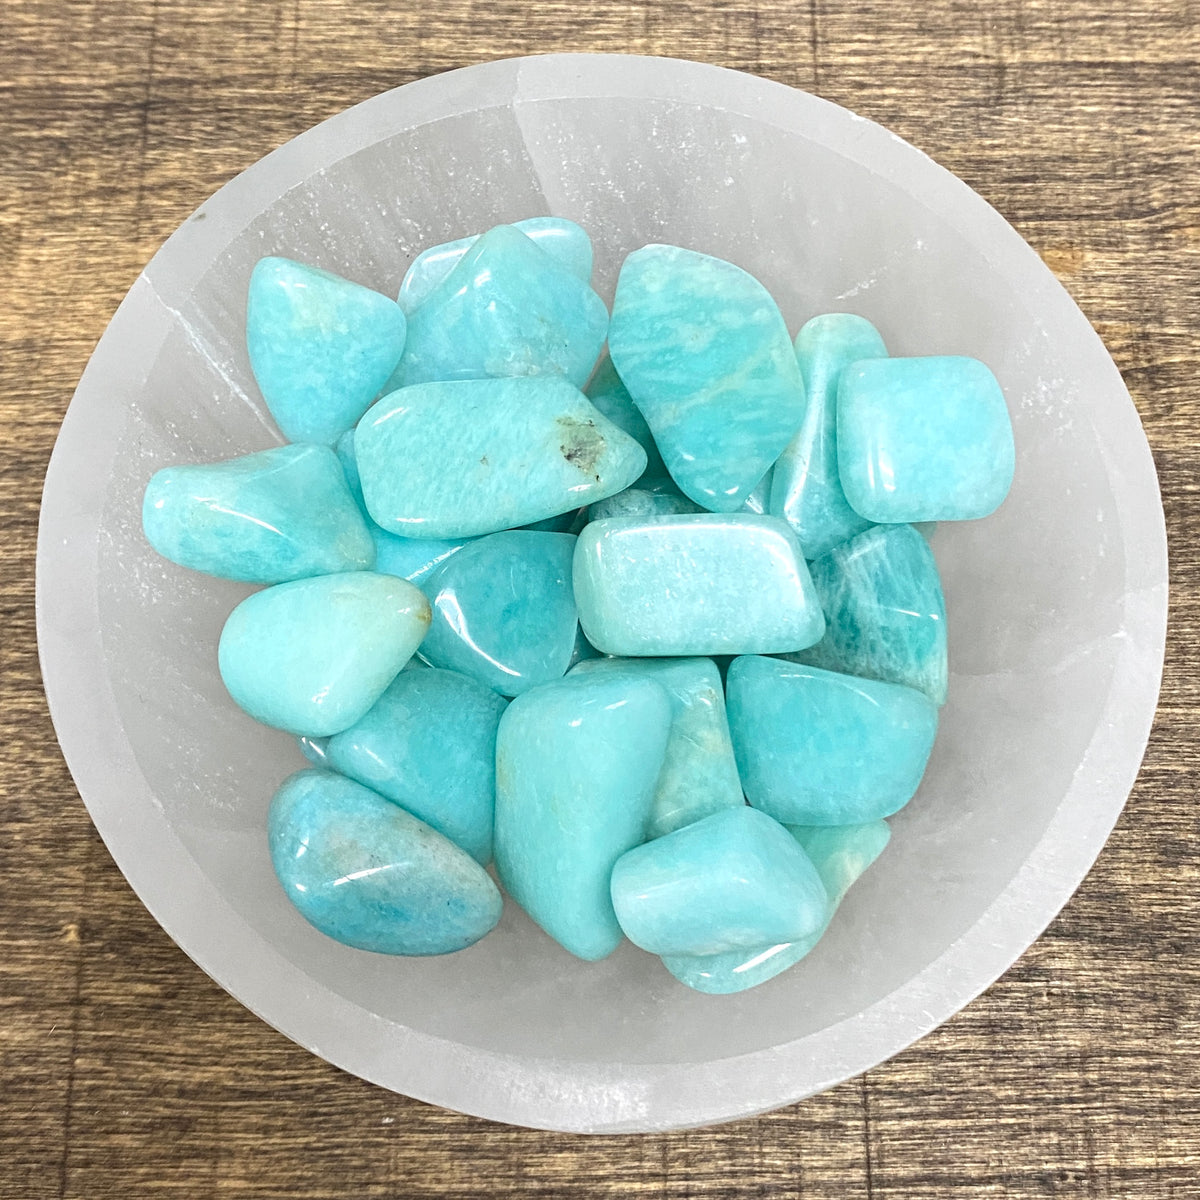 Overhead shot of various Amazonite tumbled stones in a small bowl.